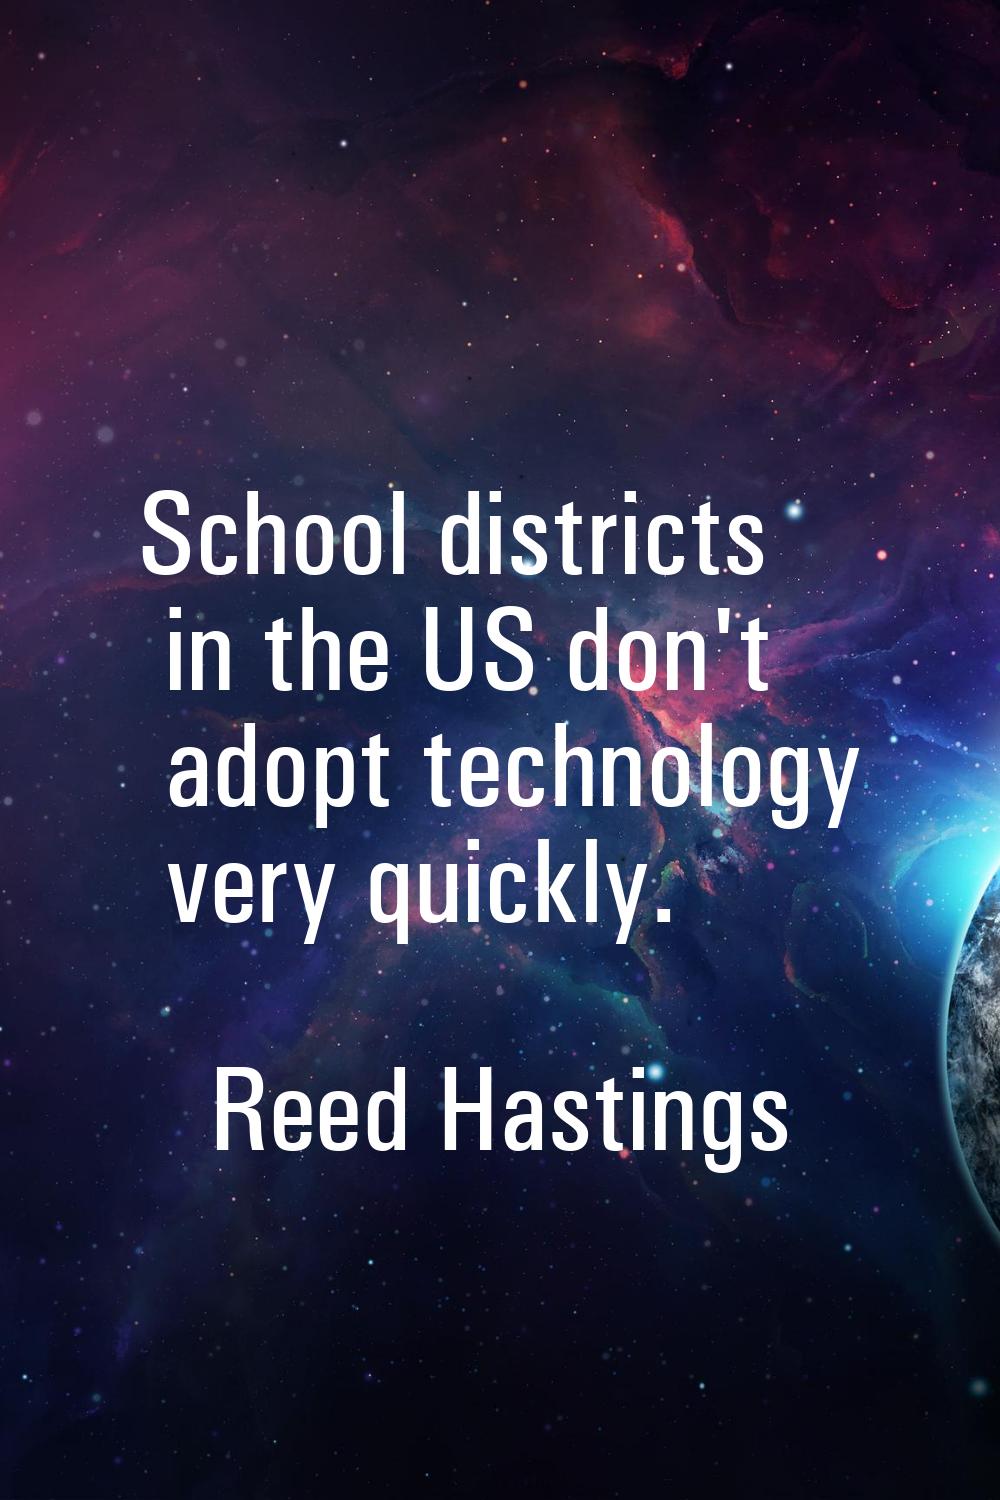 School districts in the US don't adopt technology very quickly.